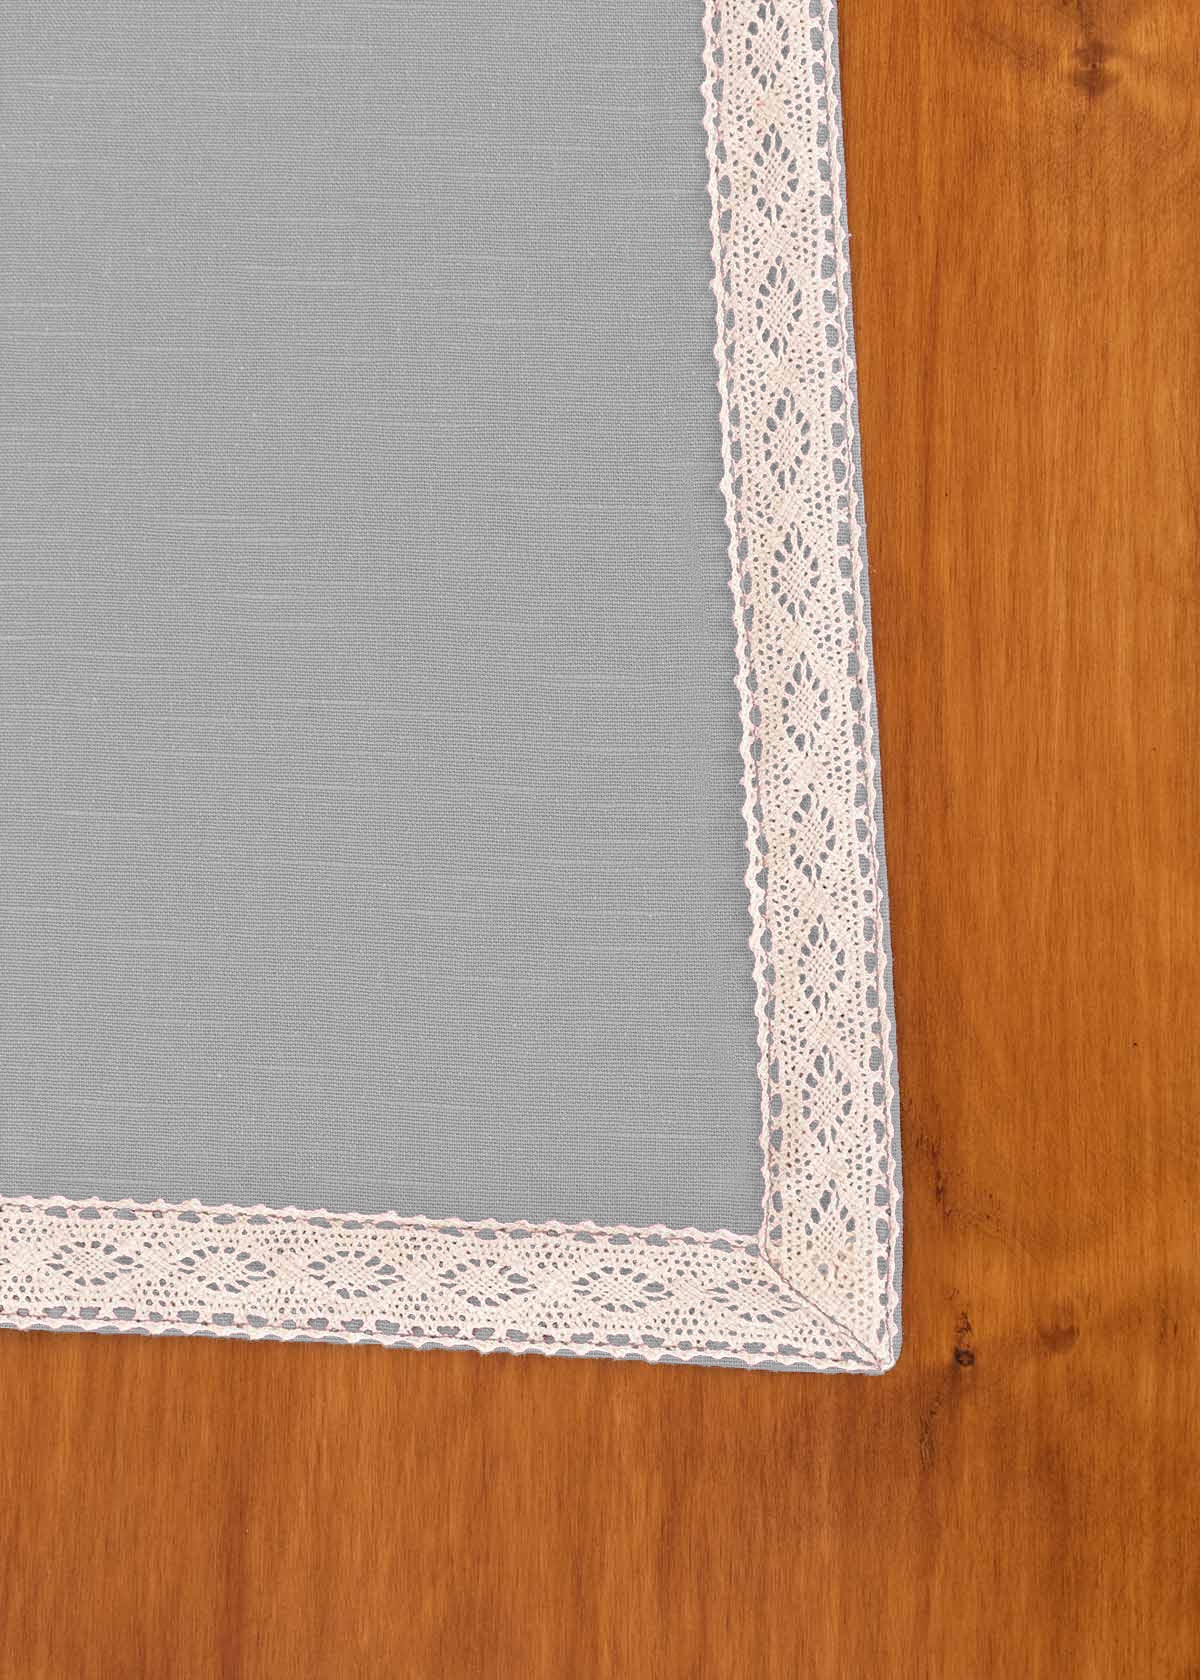 Solid Grey 100% cotton plain table cloth for 4 seater or 6 seater dining with lace border